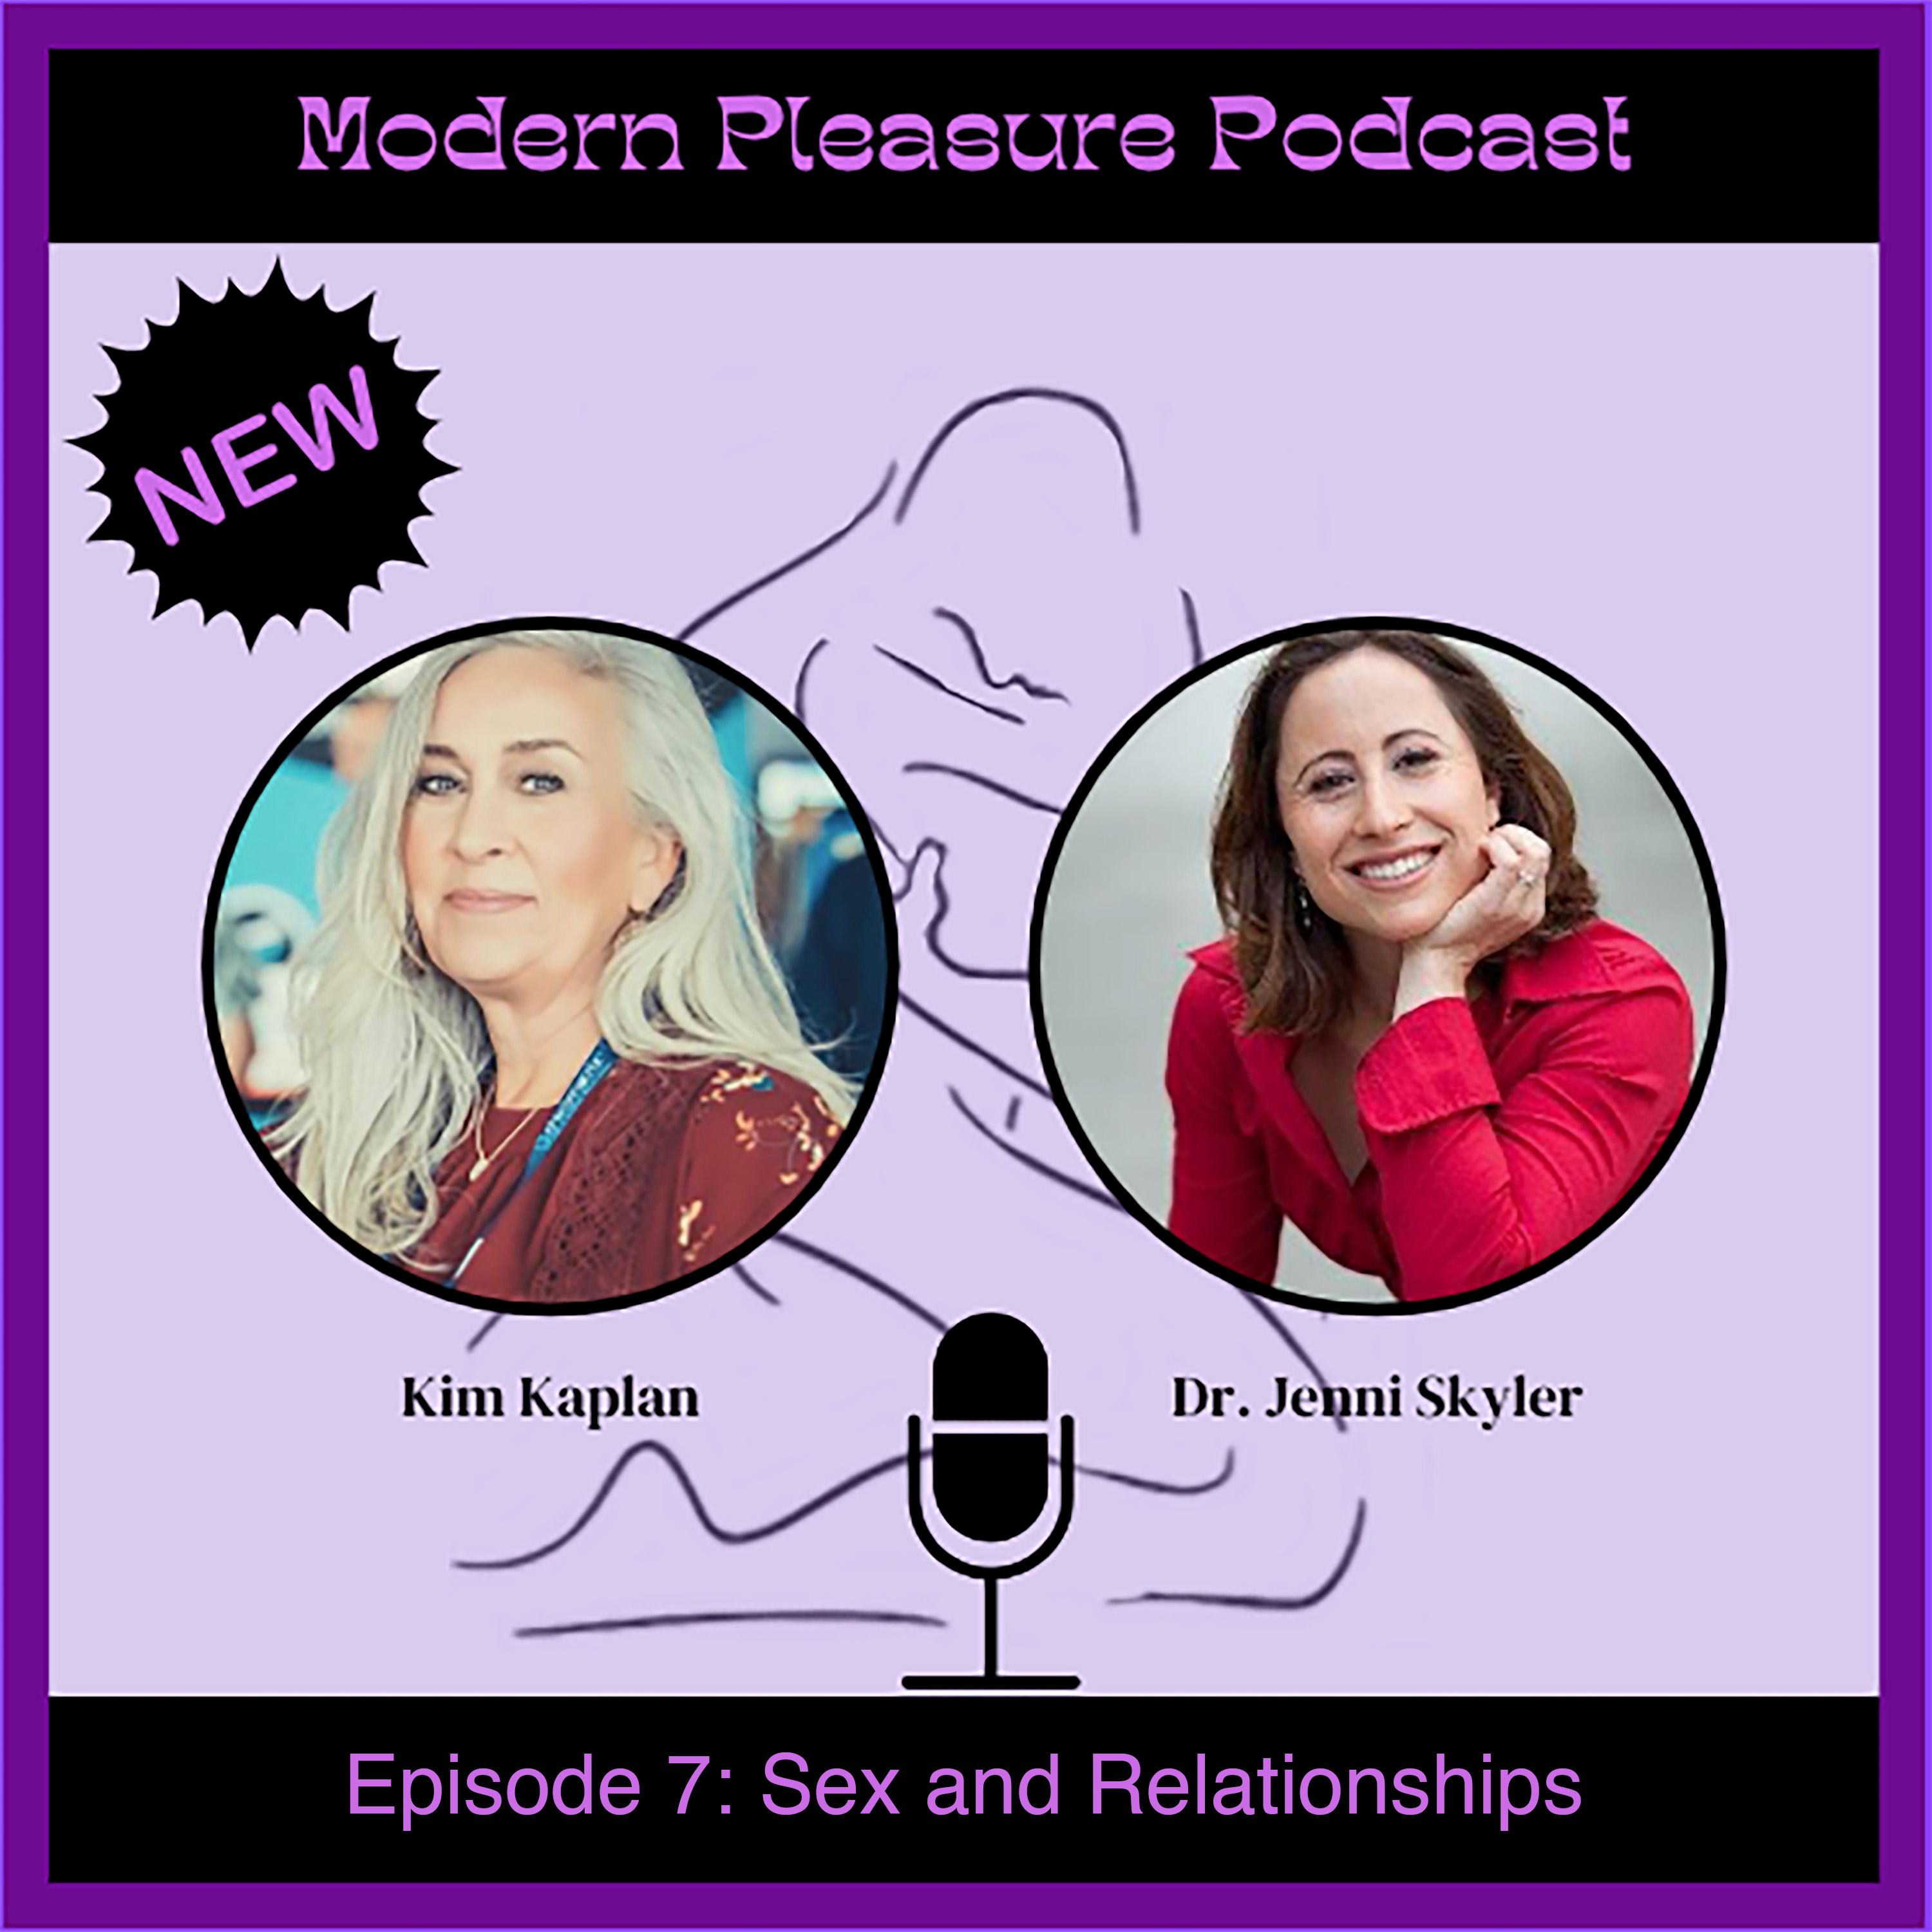 Episode 7: Sex and Relationships - Let's talk "Out of the Box"